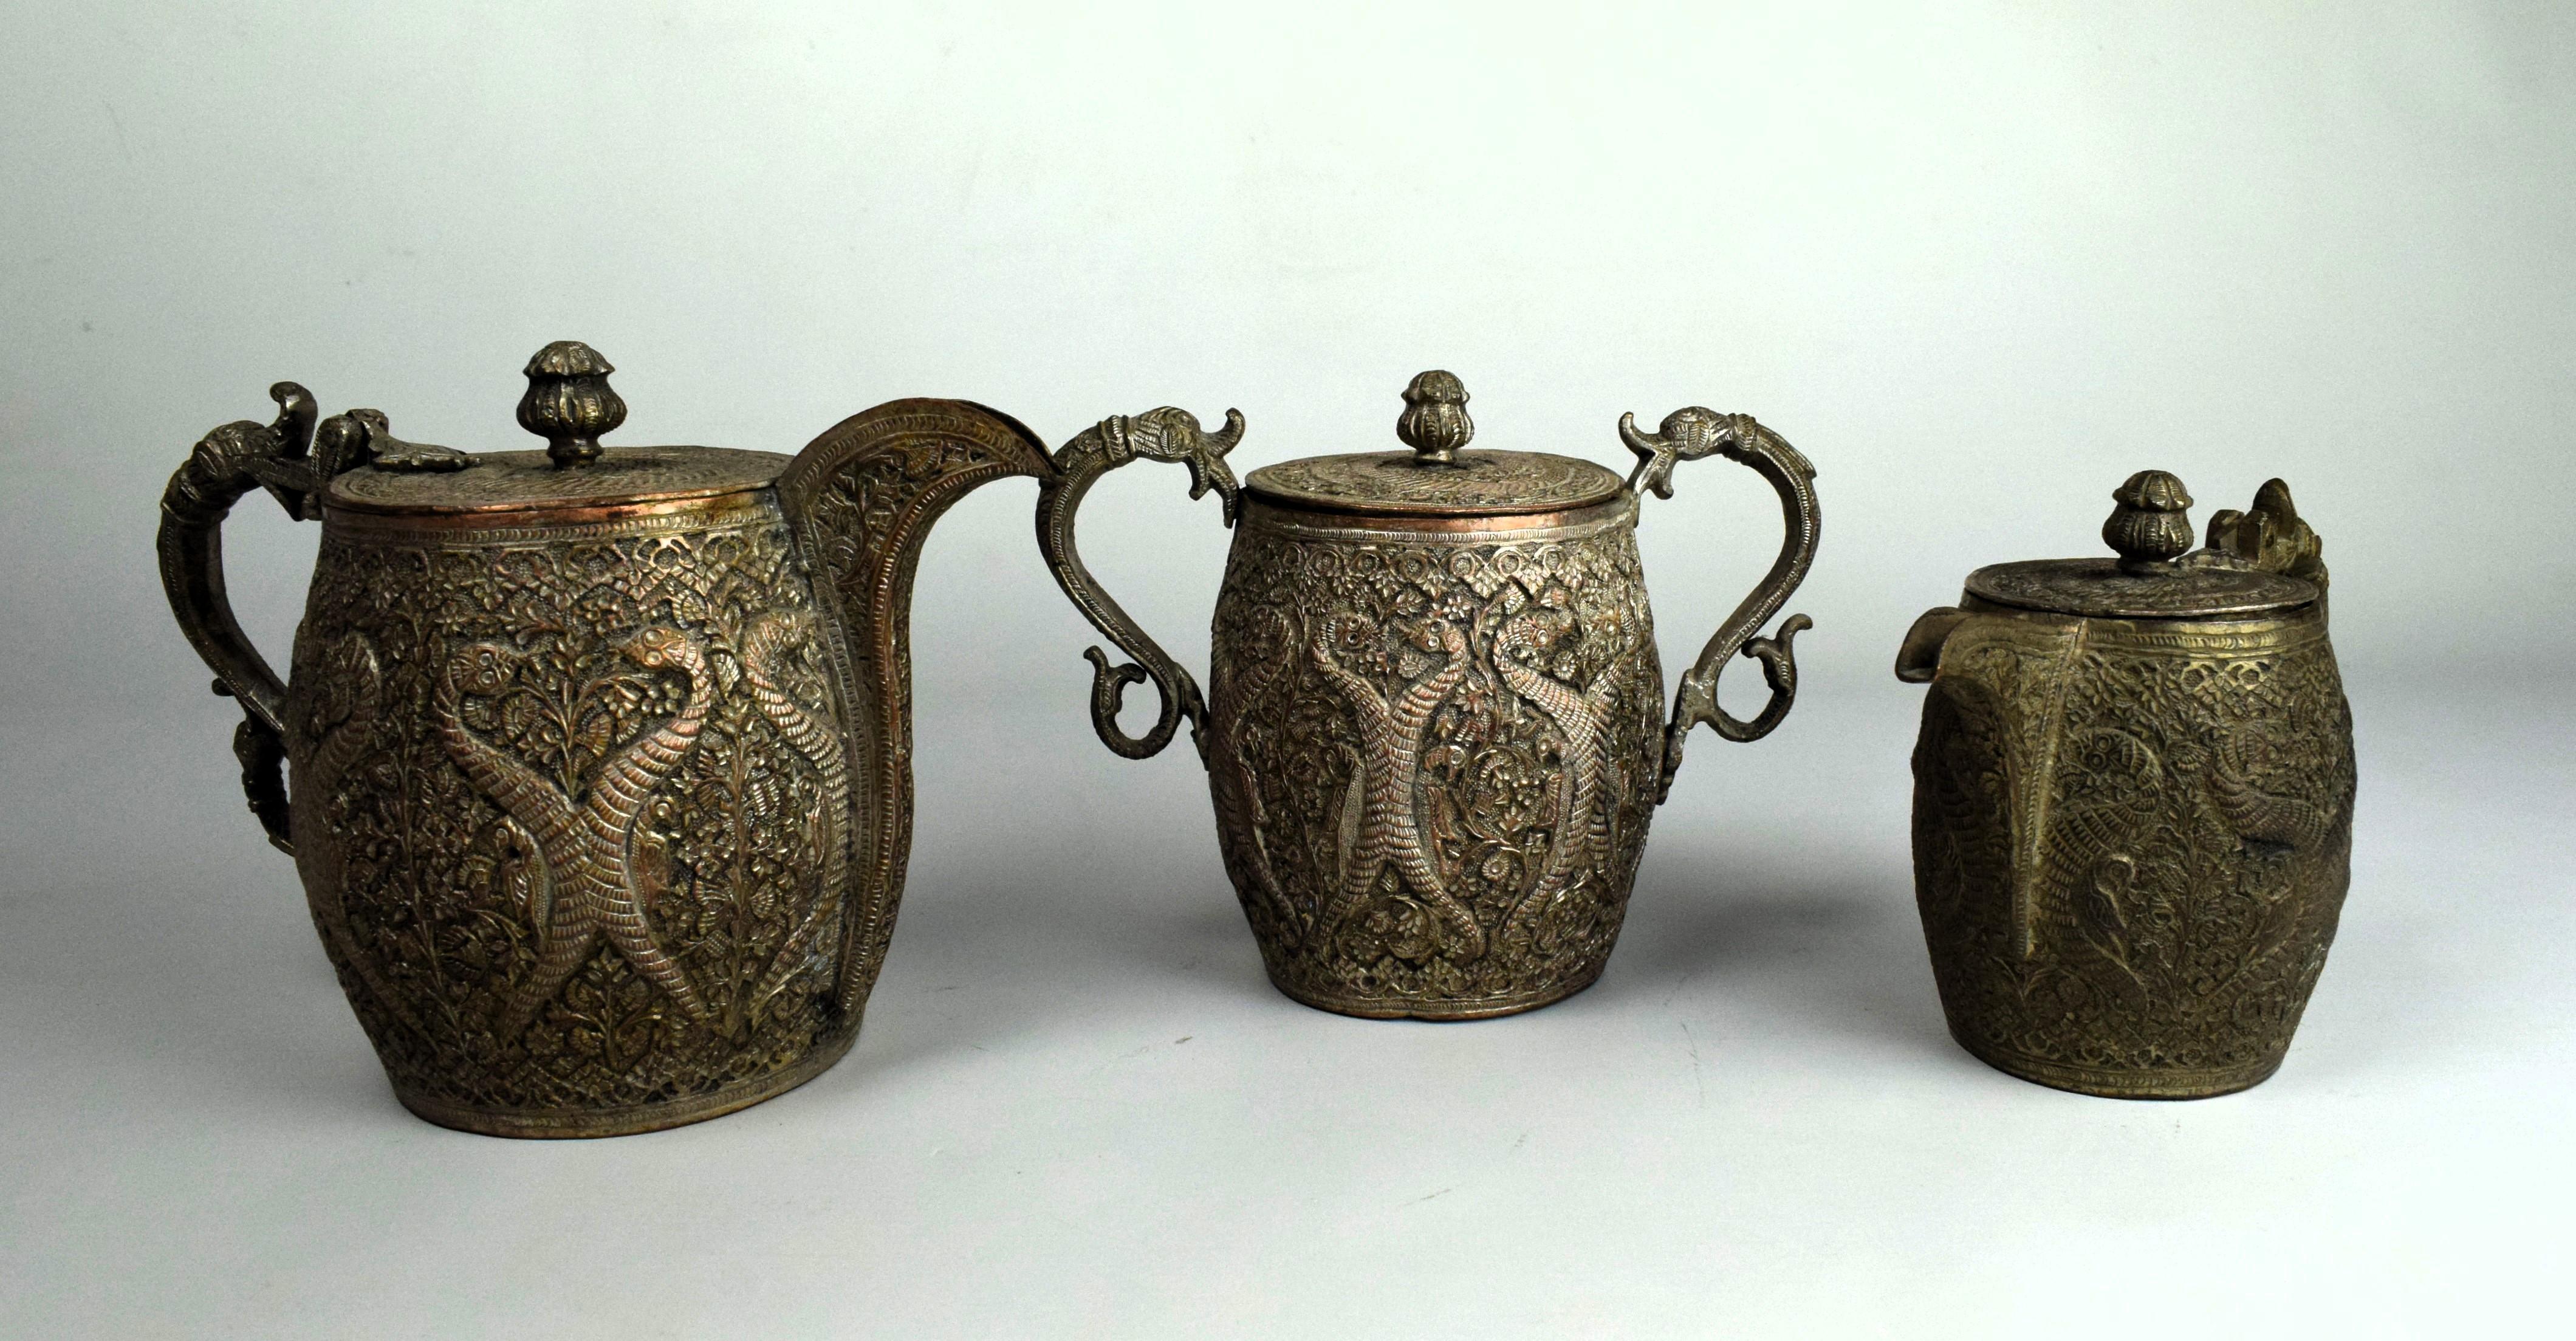 This 19th-century Kashmiri Mughal copper tea set, consisting of a saucer, sugar pot, and milk pot, is a magnificent representation of the region's rich artistic heritage and the influence of Mughal aesthetics. 

The saucer, sugar pot, and milk pot